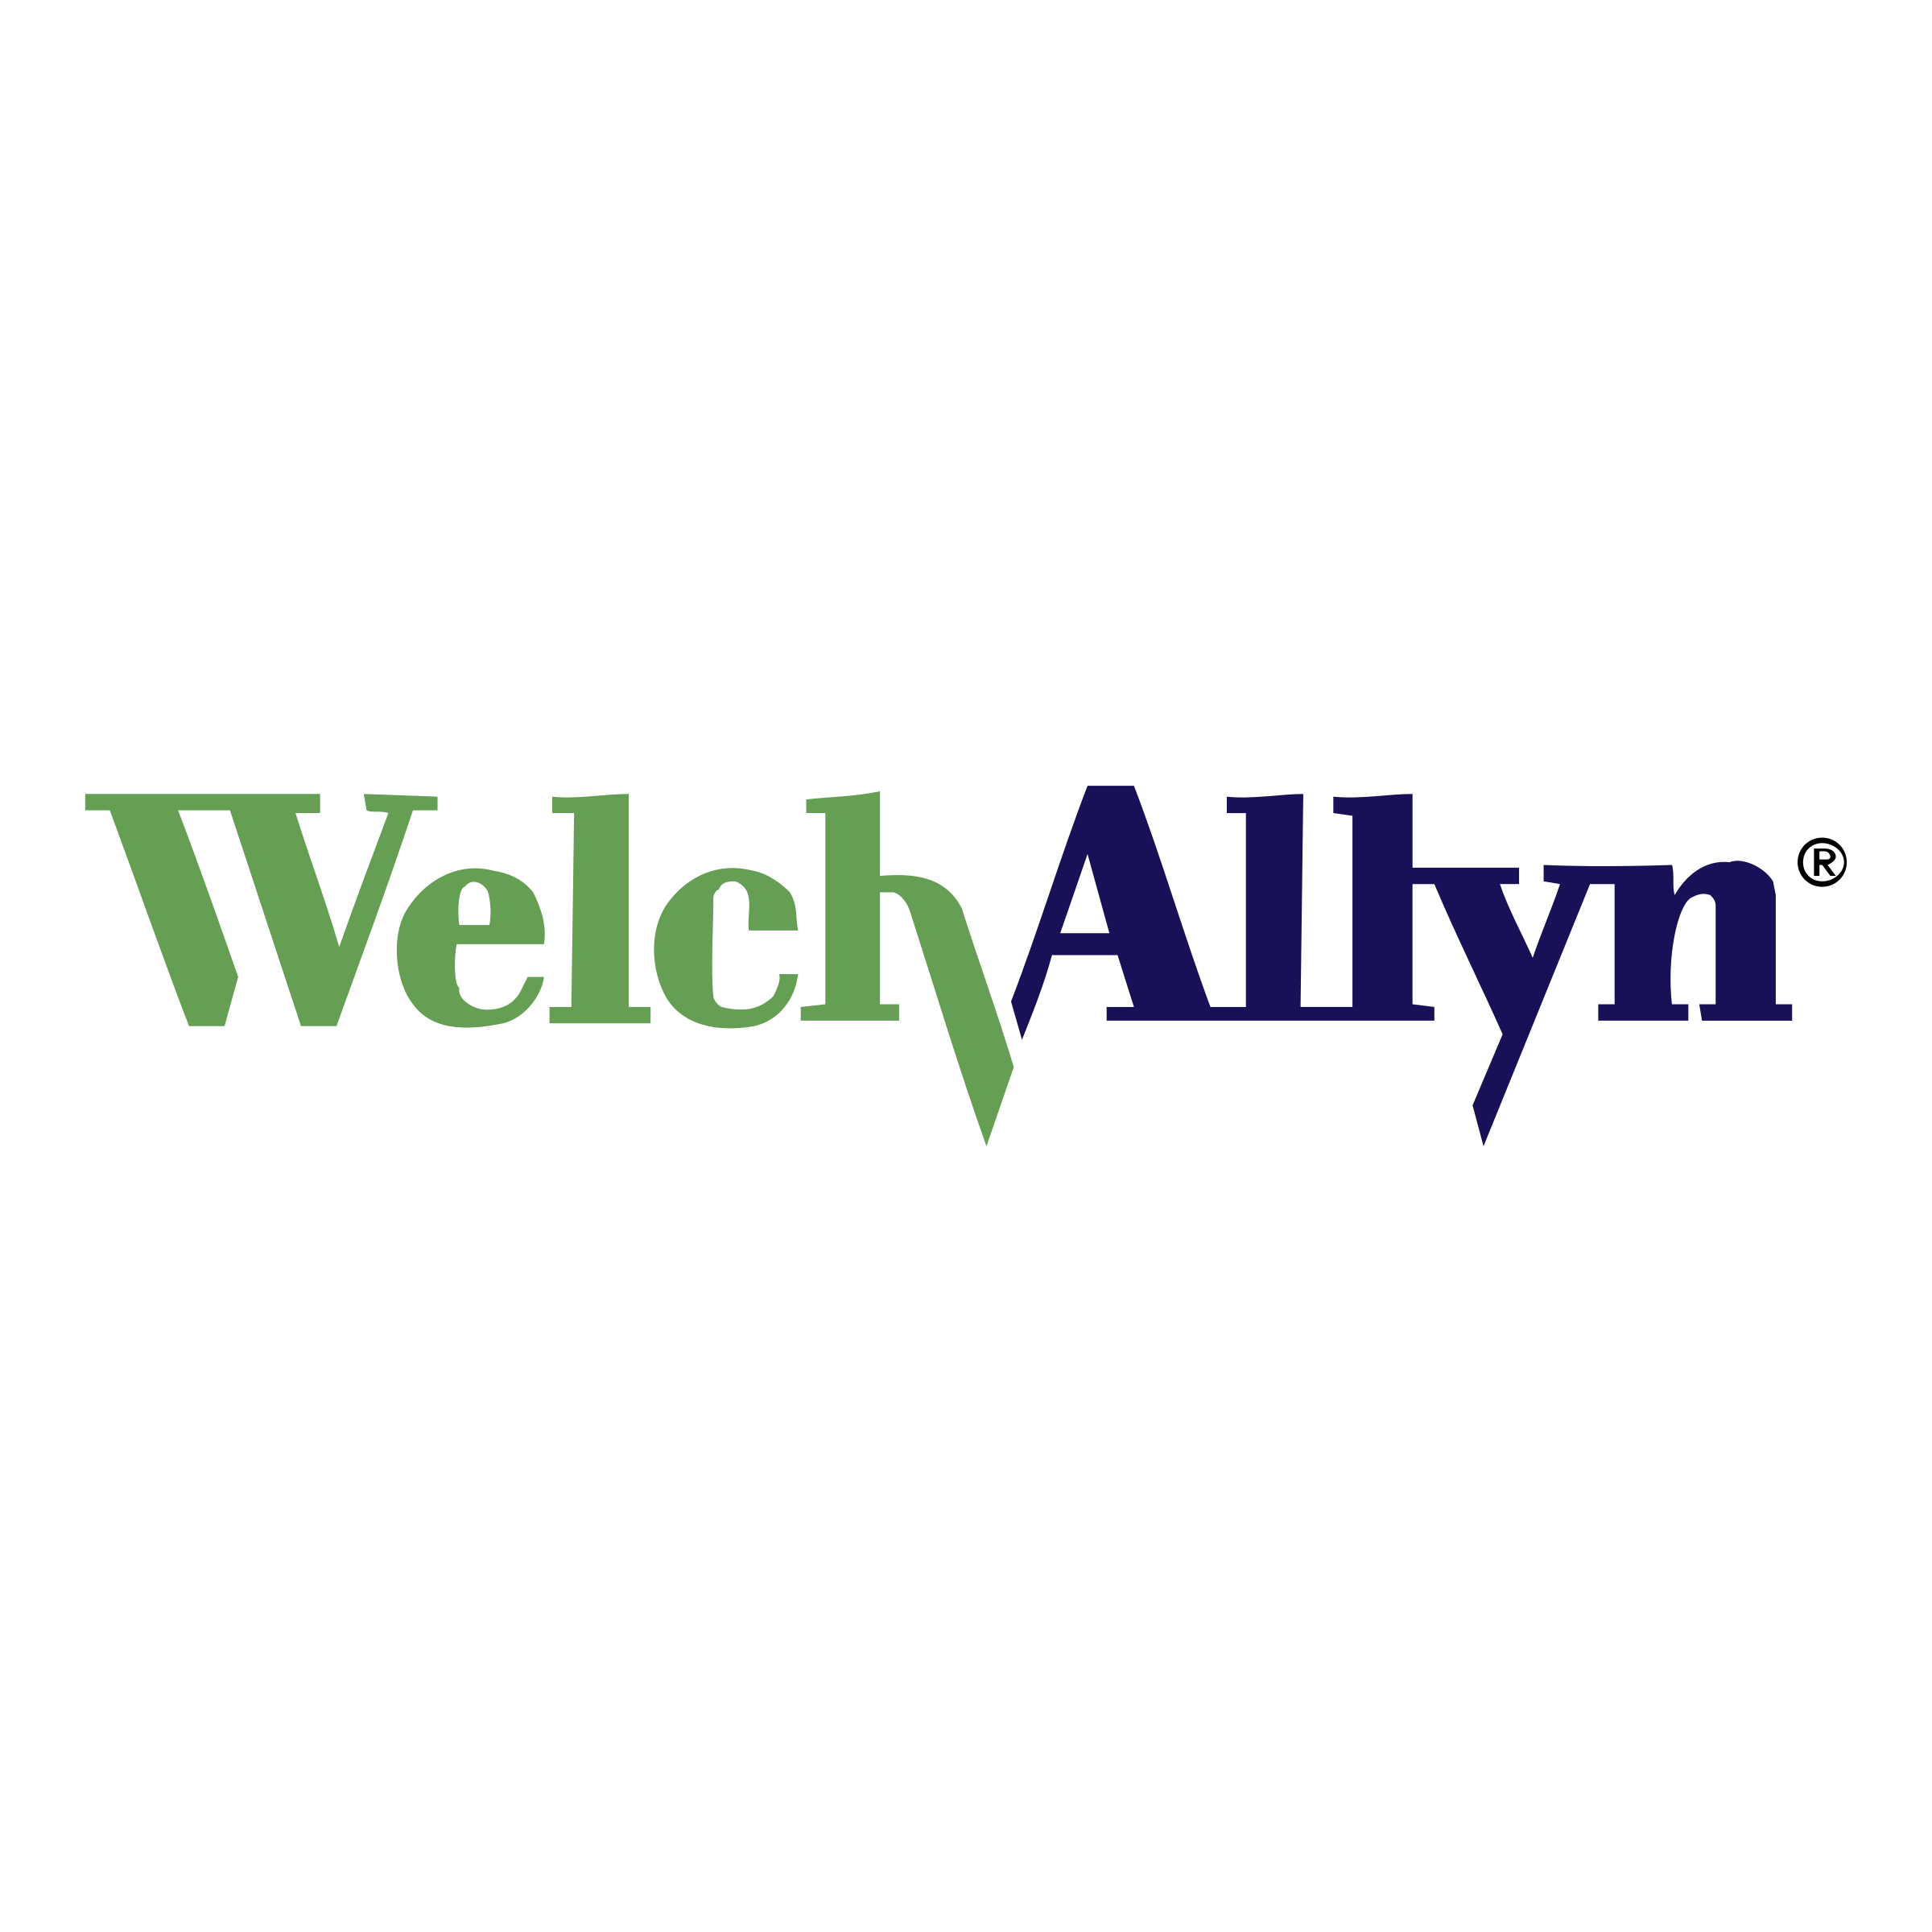 Equiptrack includes Welch Allyn equipment